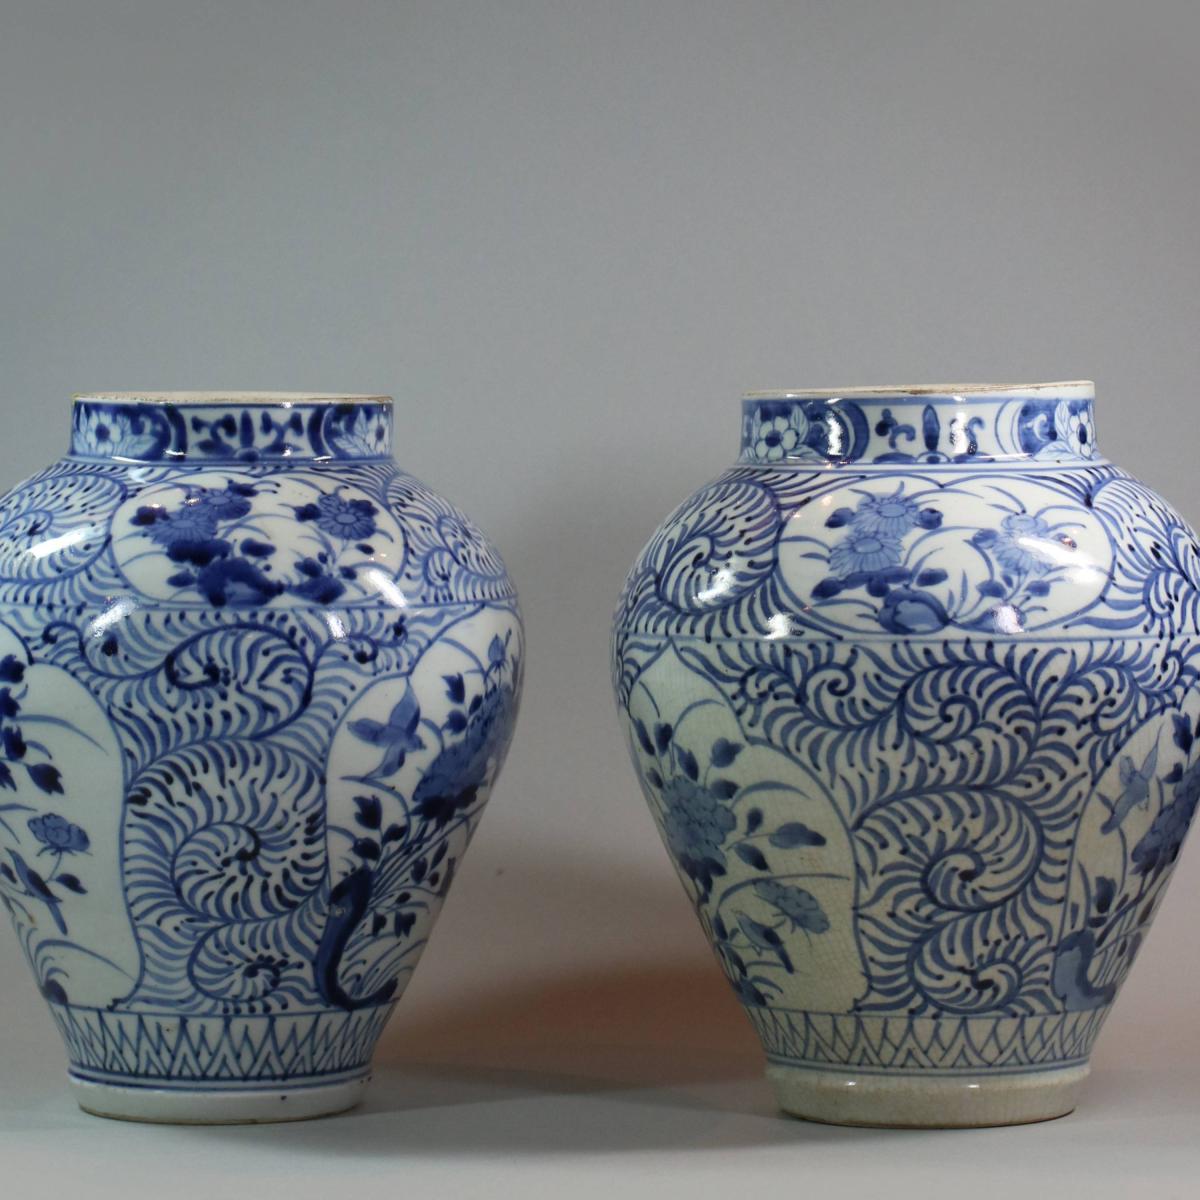 Sides of pair of blue and white Japanese case, circa 1700